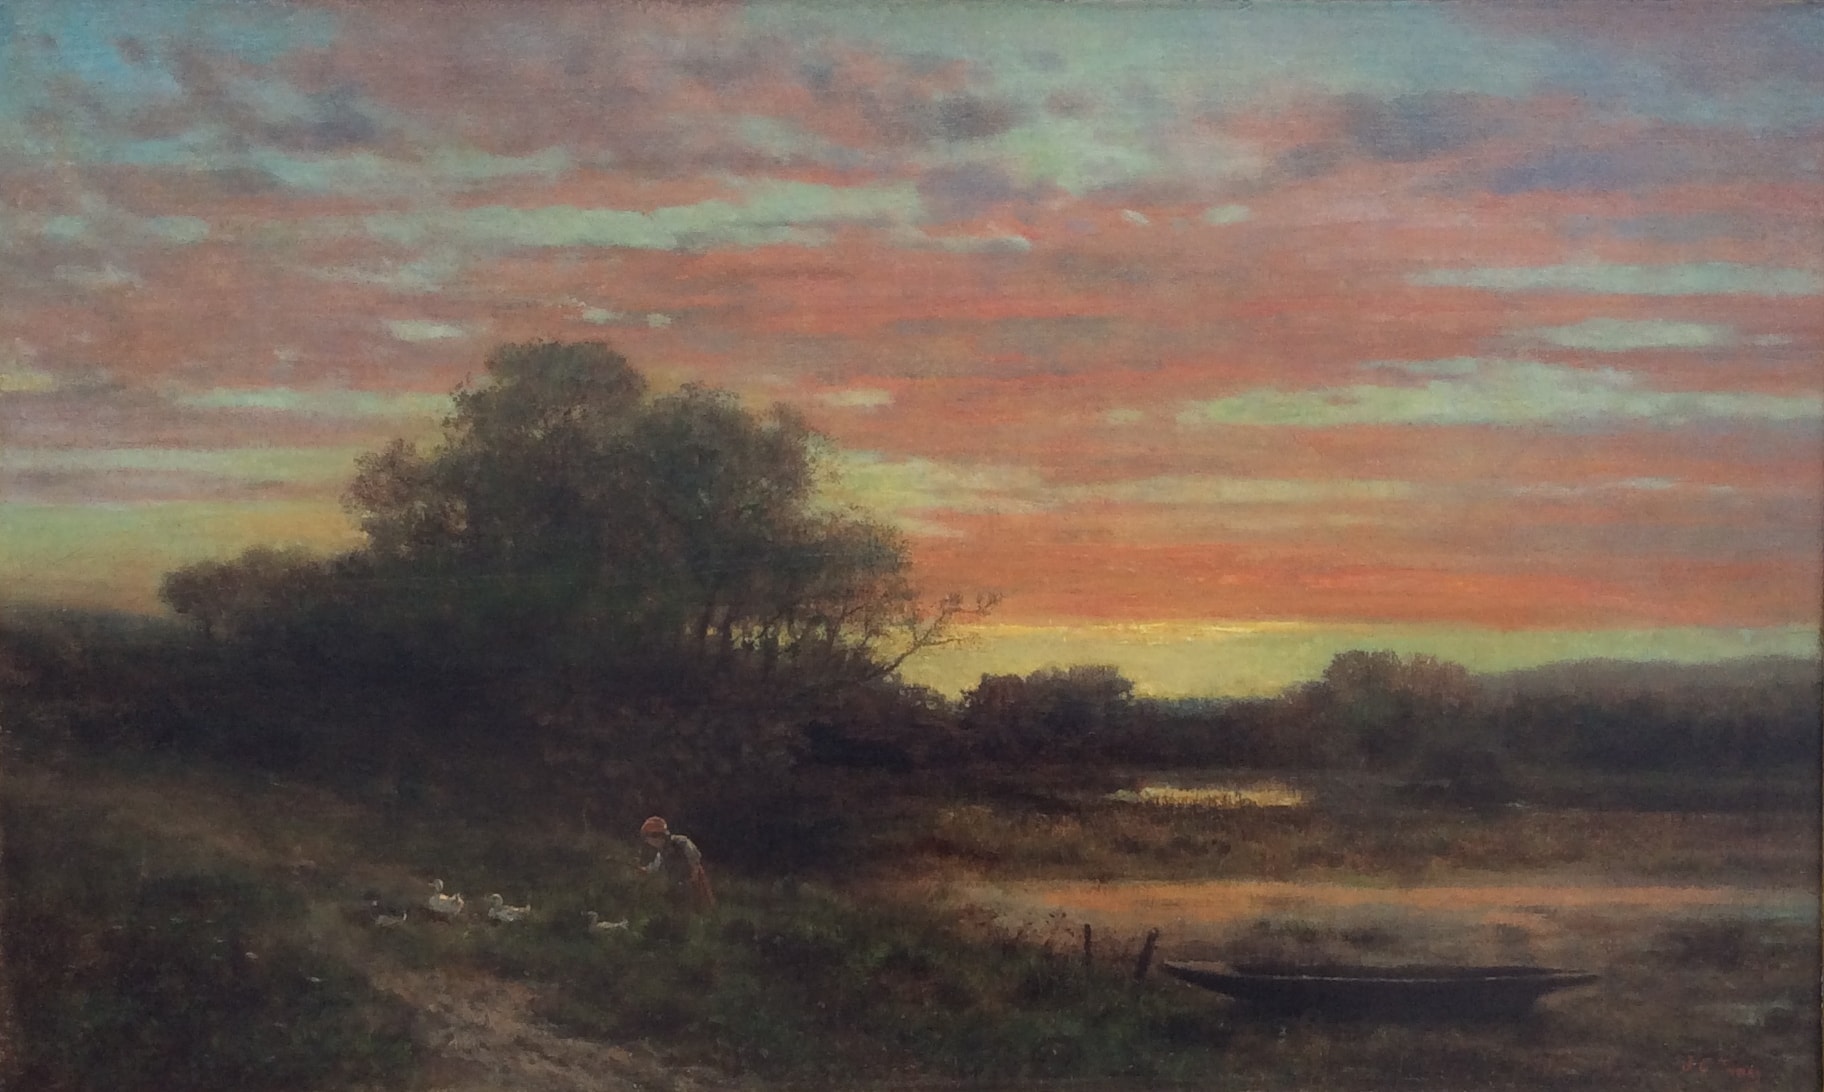 “Sunset in the Countryside”